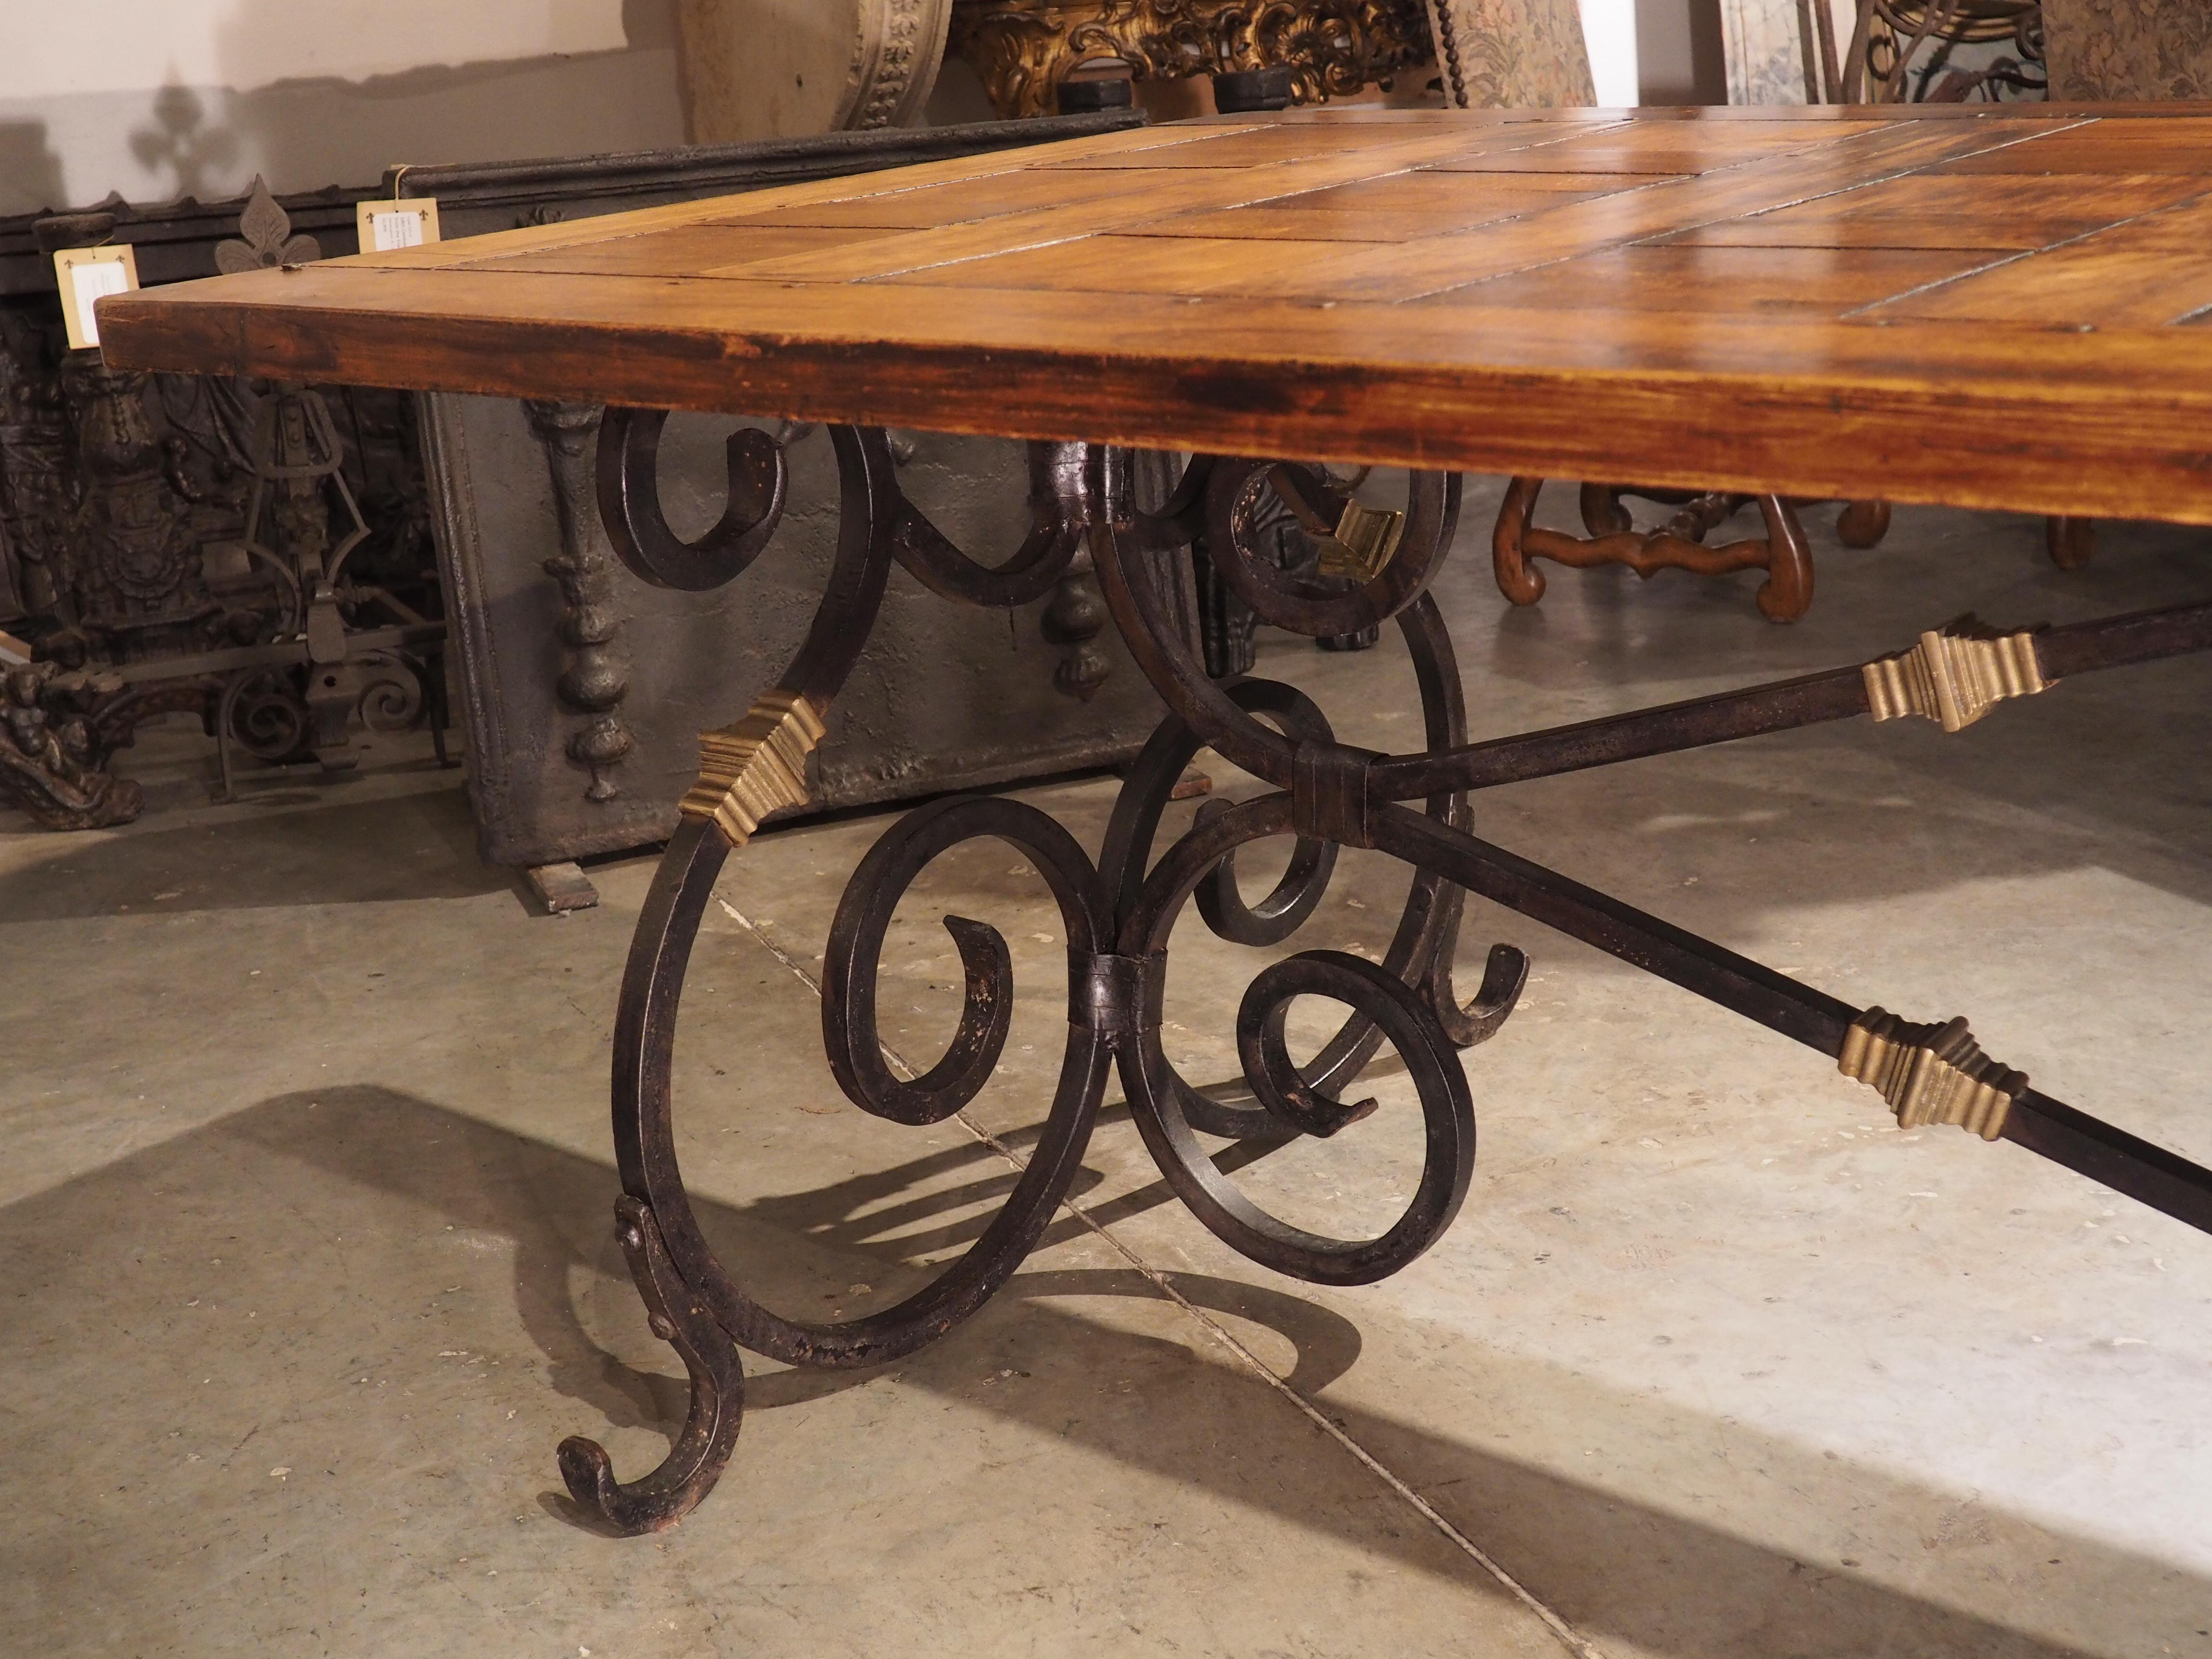 Surmounted by antique parquetry that was constructed using round pegs, this wrought iron and bronze dining table was crafted in France, circa the 1940’s. The top has been laid out in a linear echelle (ladder) parquetry pattern, contrasting with the